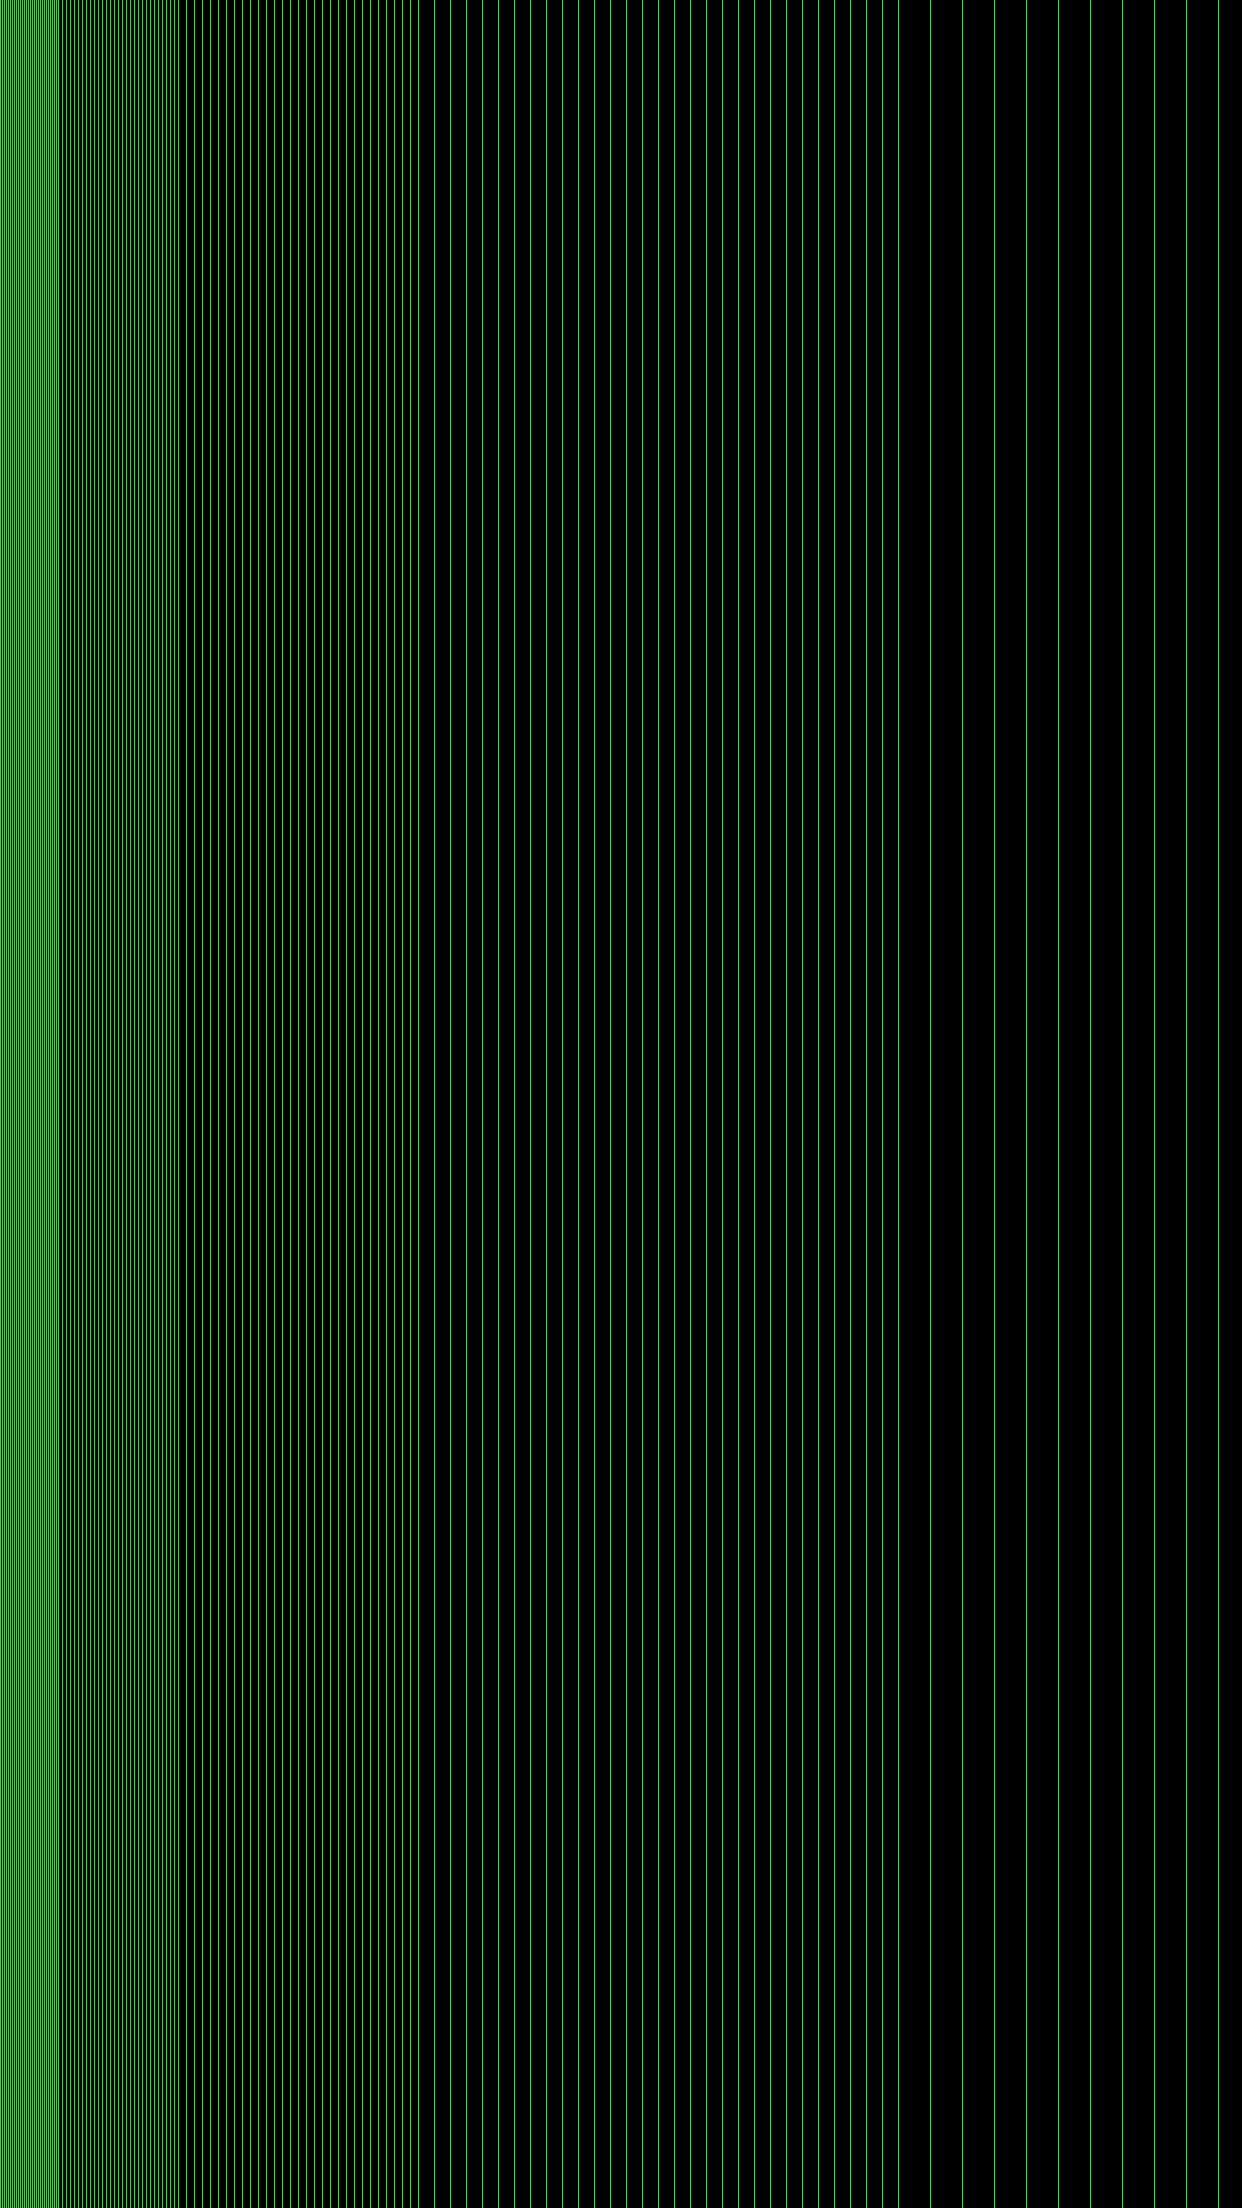 Rendering of a grid of vertical green hairlines with varying spacing